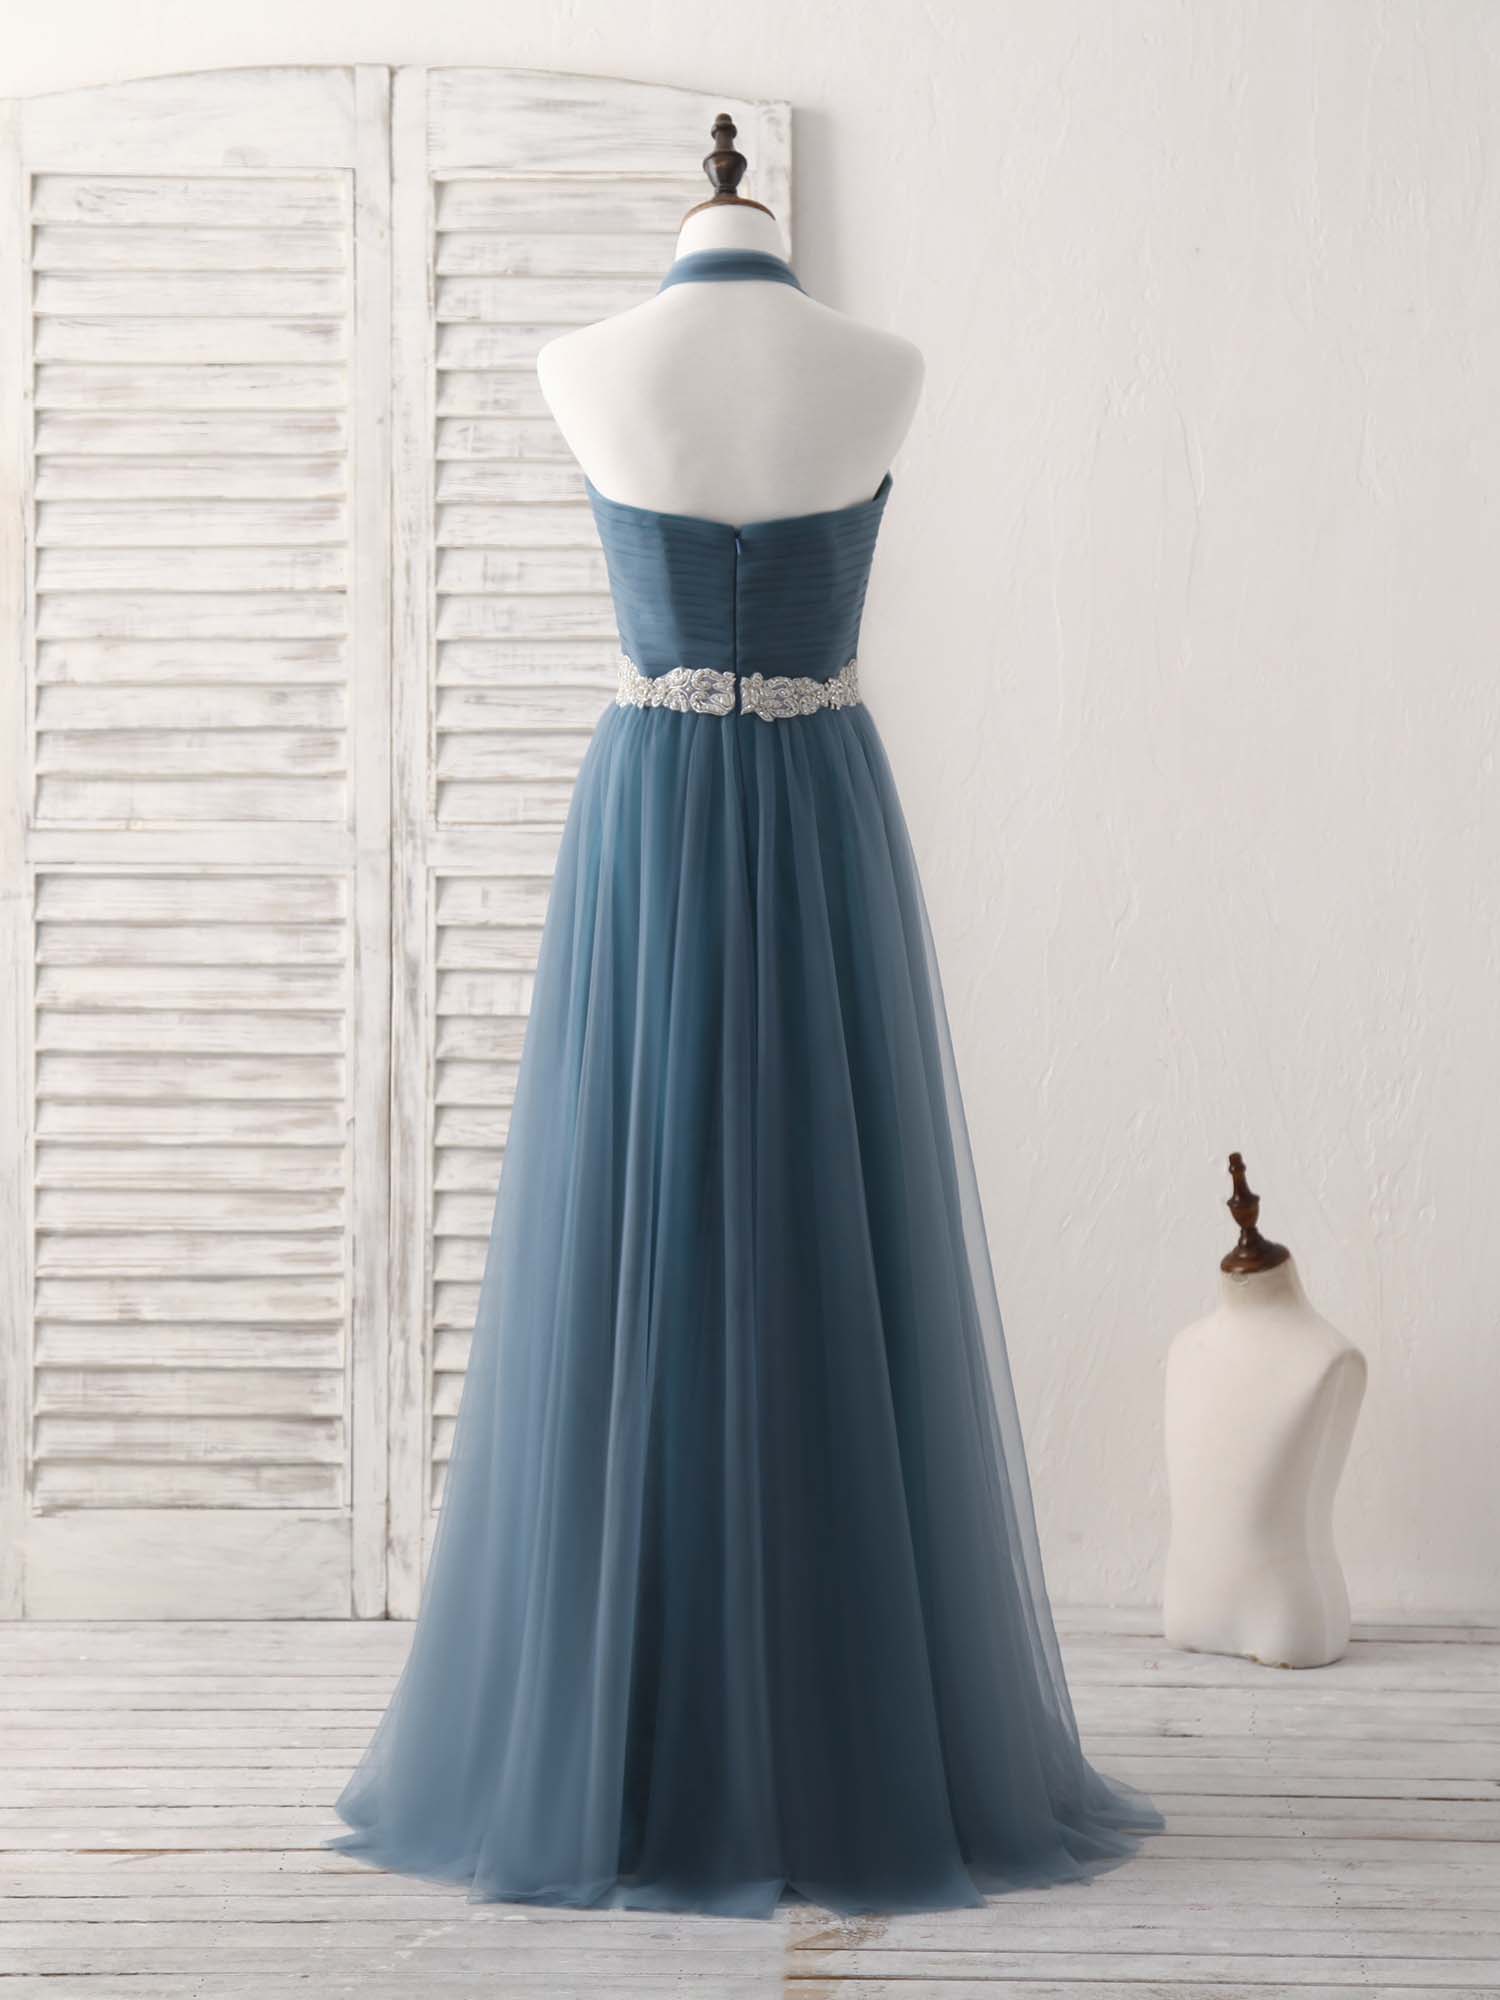 Bachelorette Party Games, A-Line Gray Blue Tulle Long Bridesmaid Dress Gray Blue Prom Dress